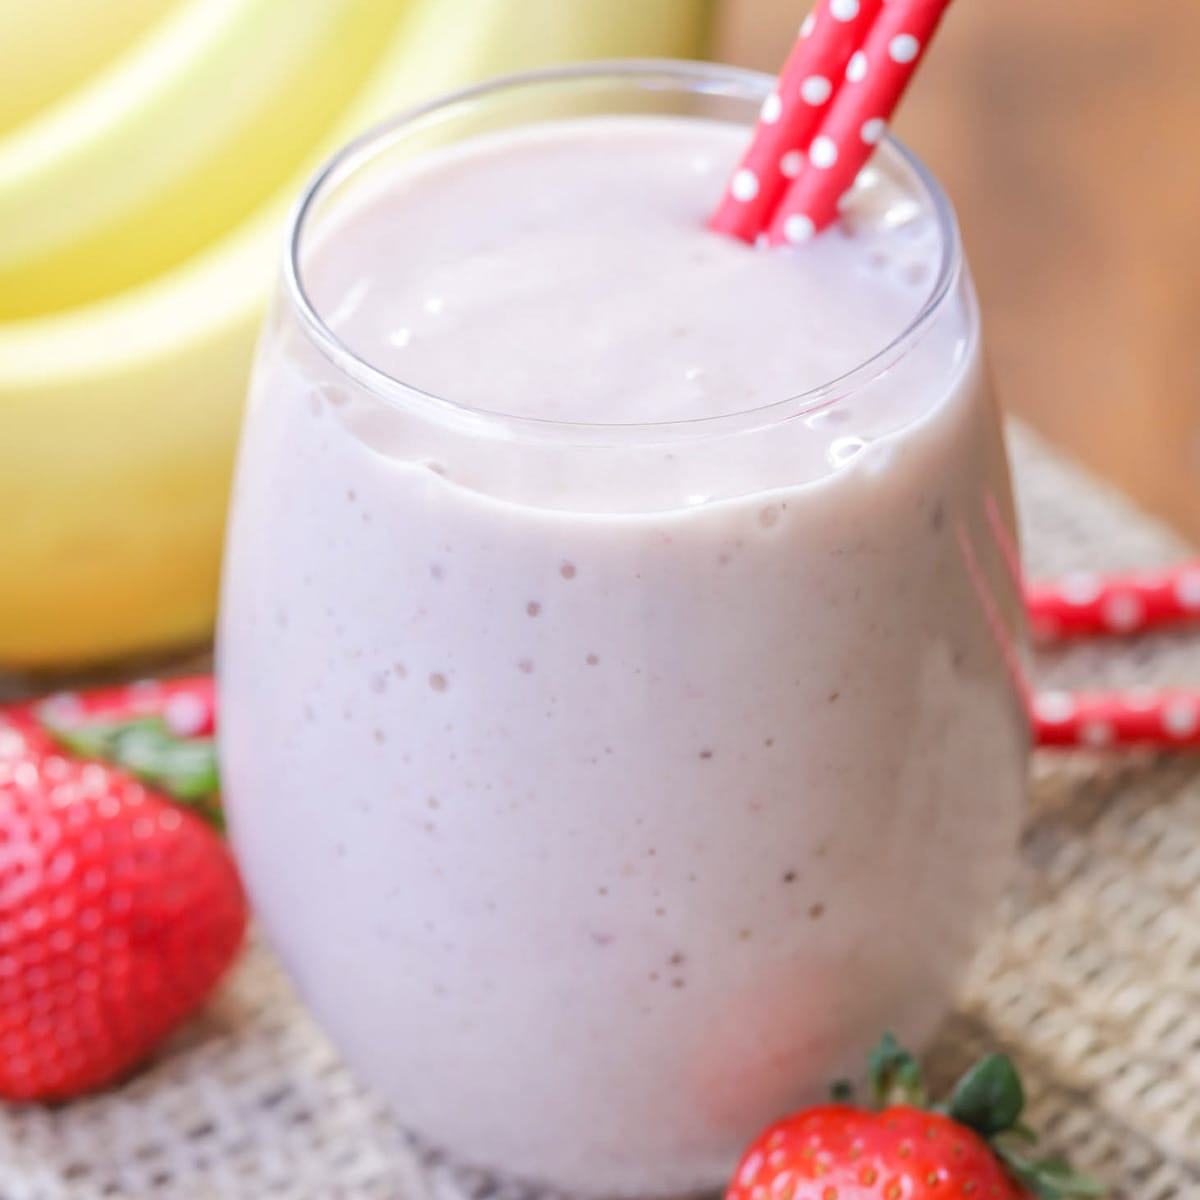 Strawberry Banana Smoothie Recipe in cup